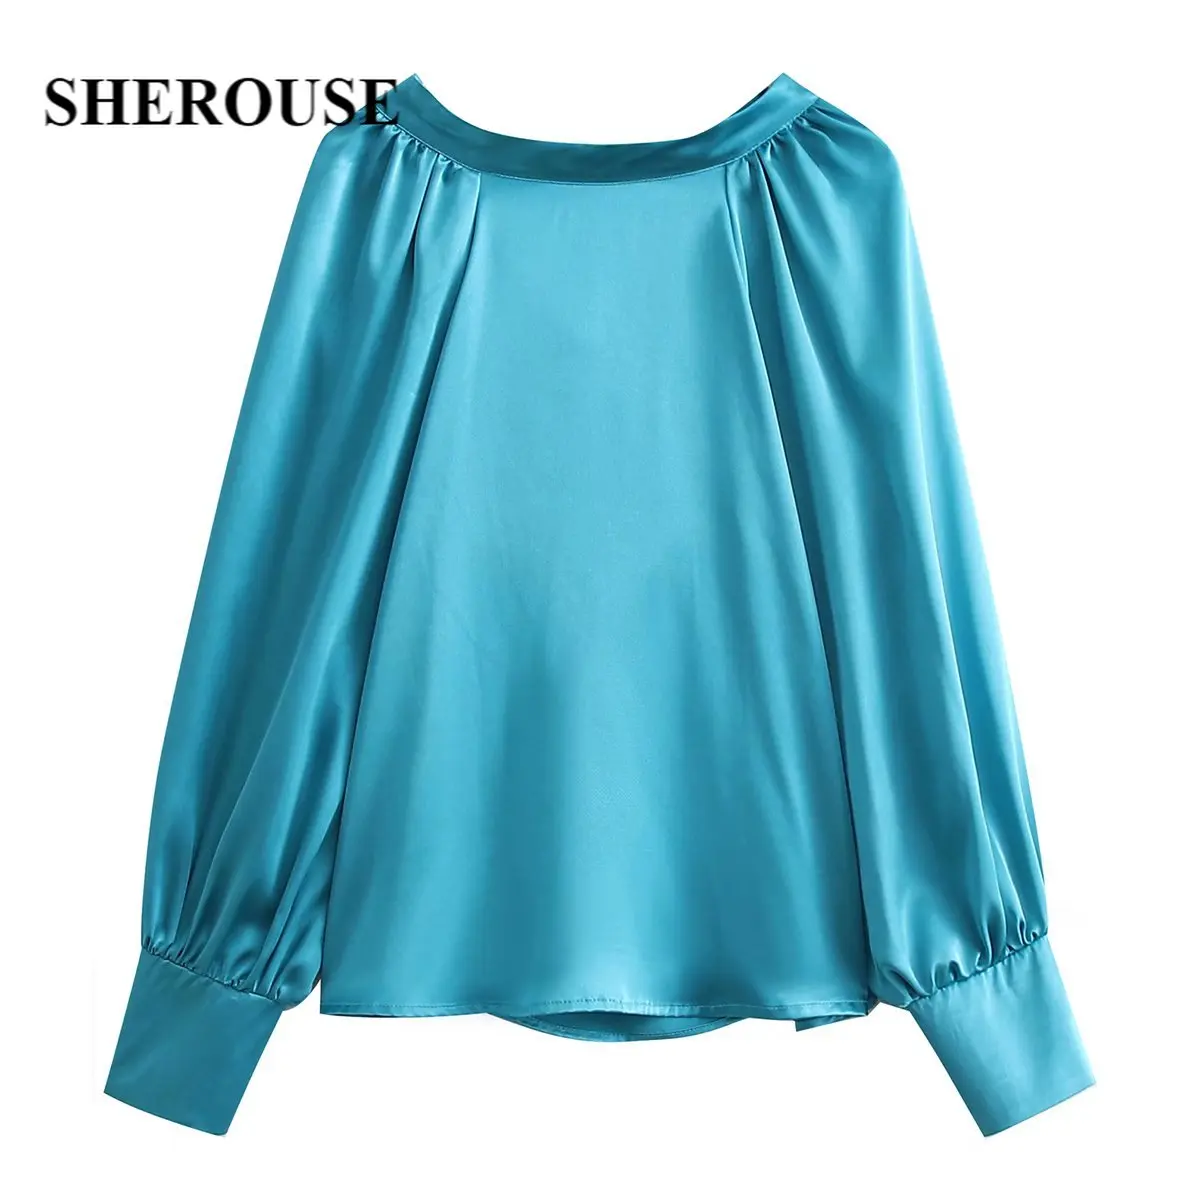 

Sherouse Women Fashion Lake Blue Satin Blouse Round Neckline with Bow Knot Long Cuffed Sleeves Chic Lady Woman Casual Top